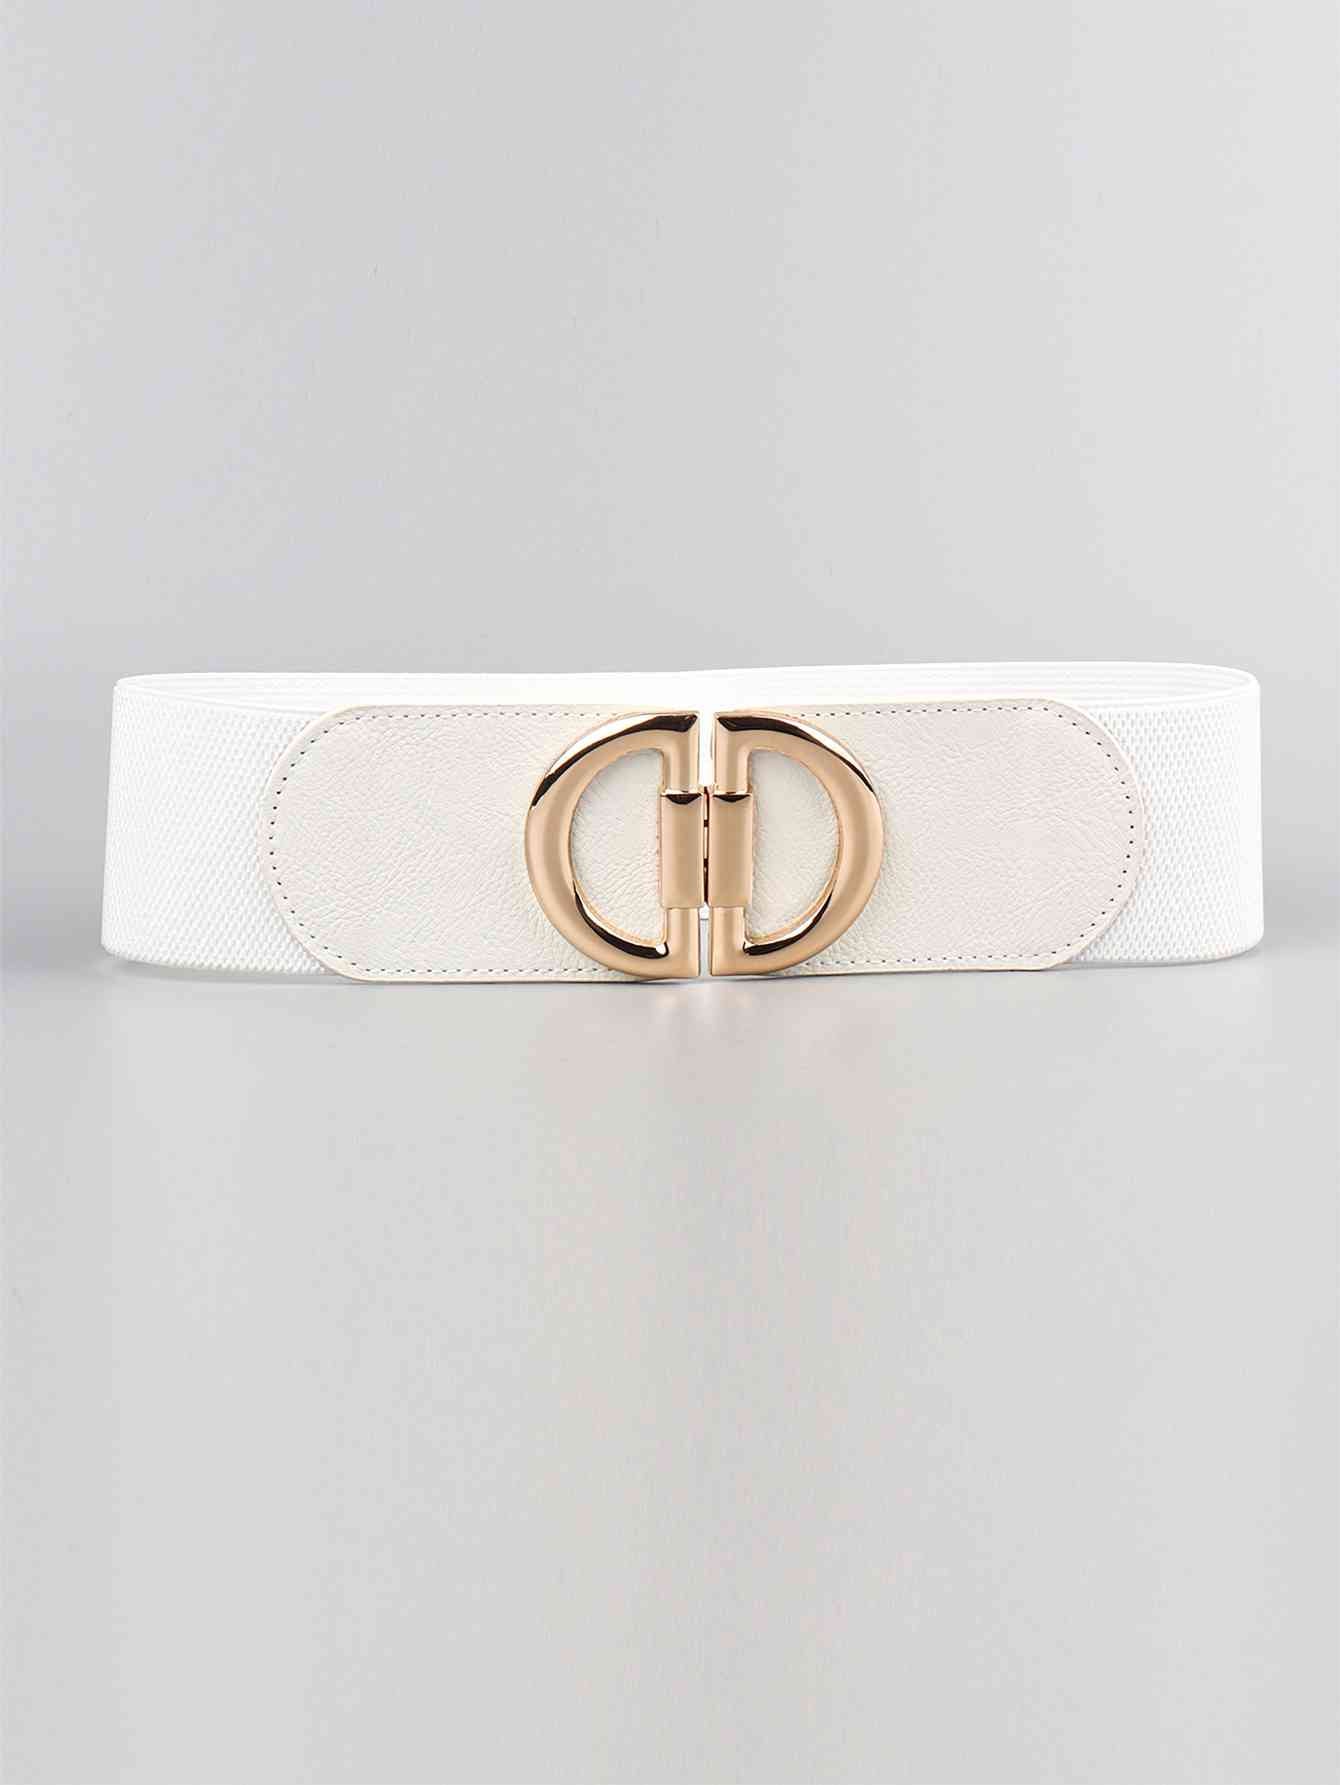 D Buckle Elastic Belt White One Size